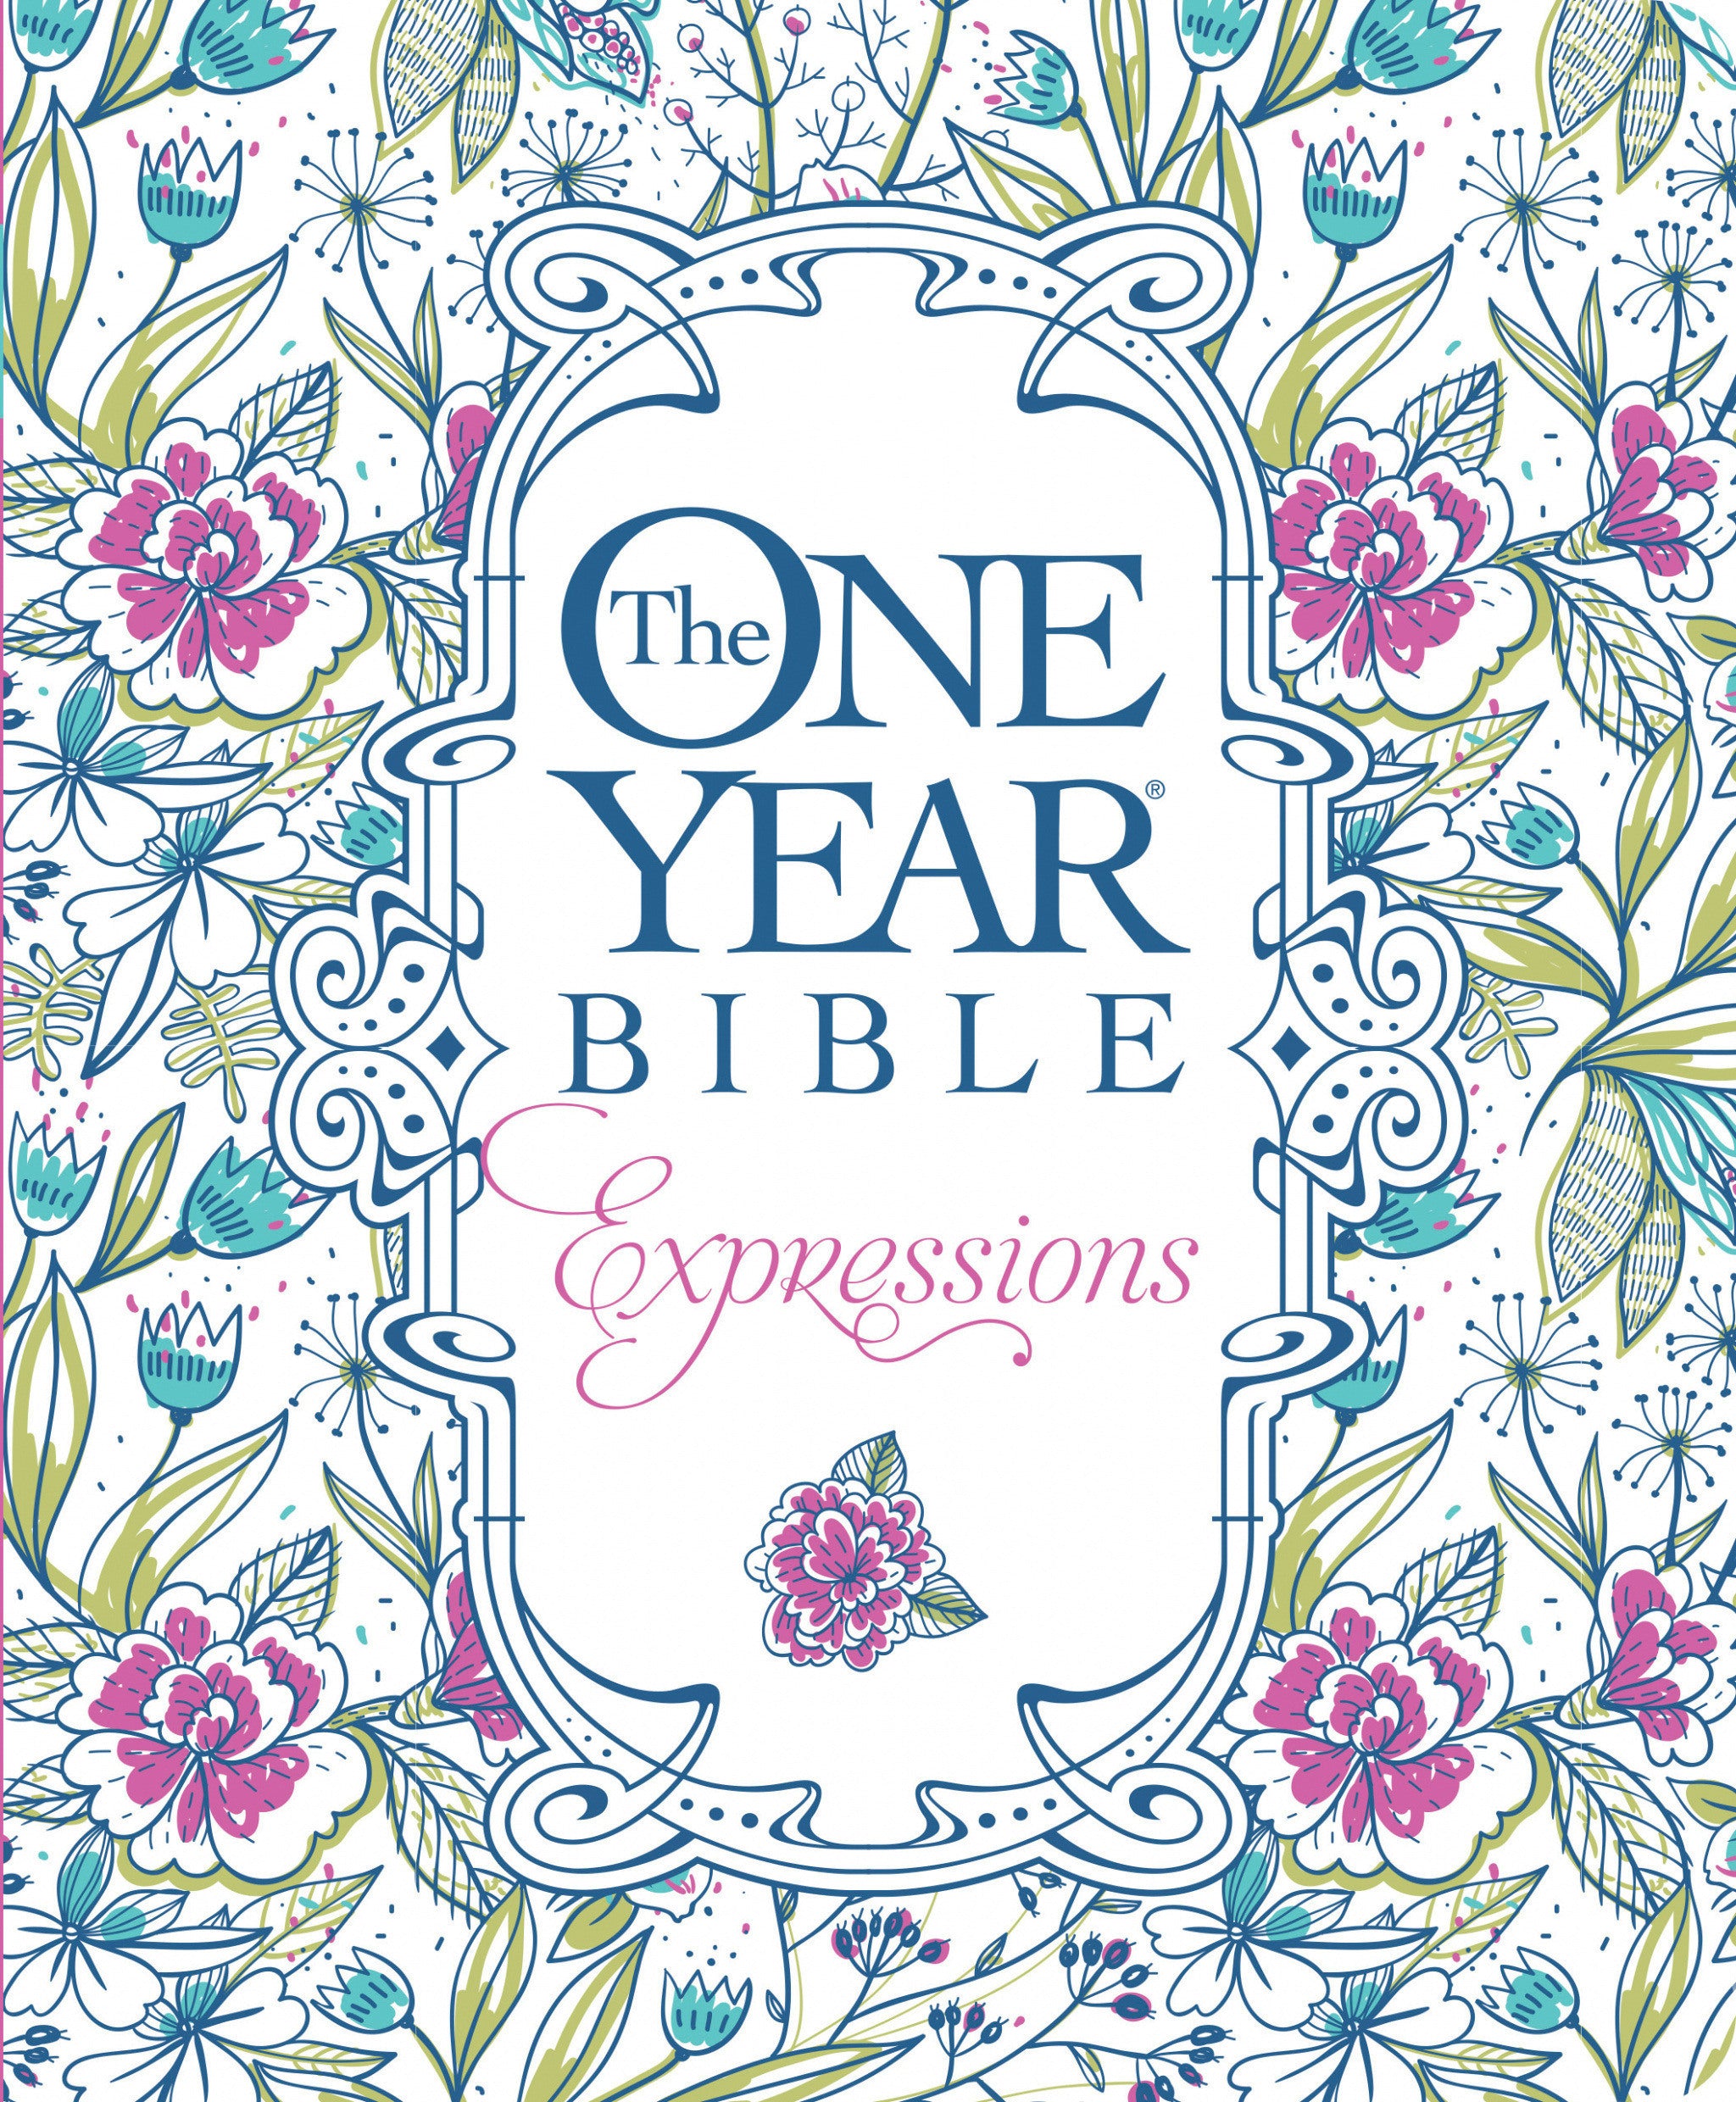 Image of NLT The One Year Bible Expressions Devotional Bible for Women White Paperback Journaling Bible Wide Margin Adult Colouring Devotional Presentation Page Illustrated Bible other